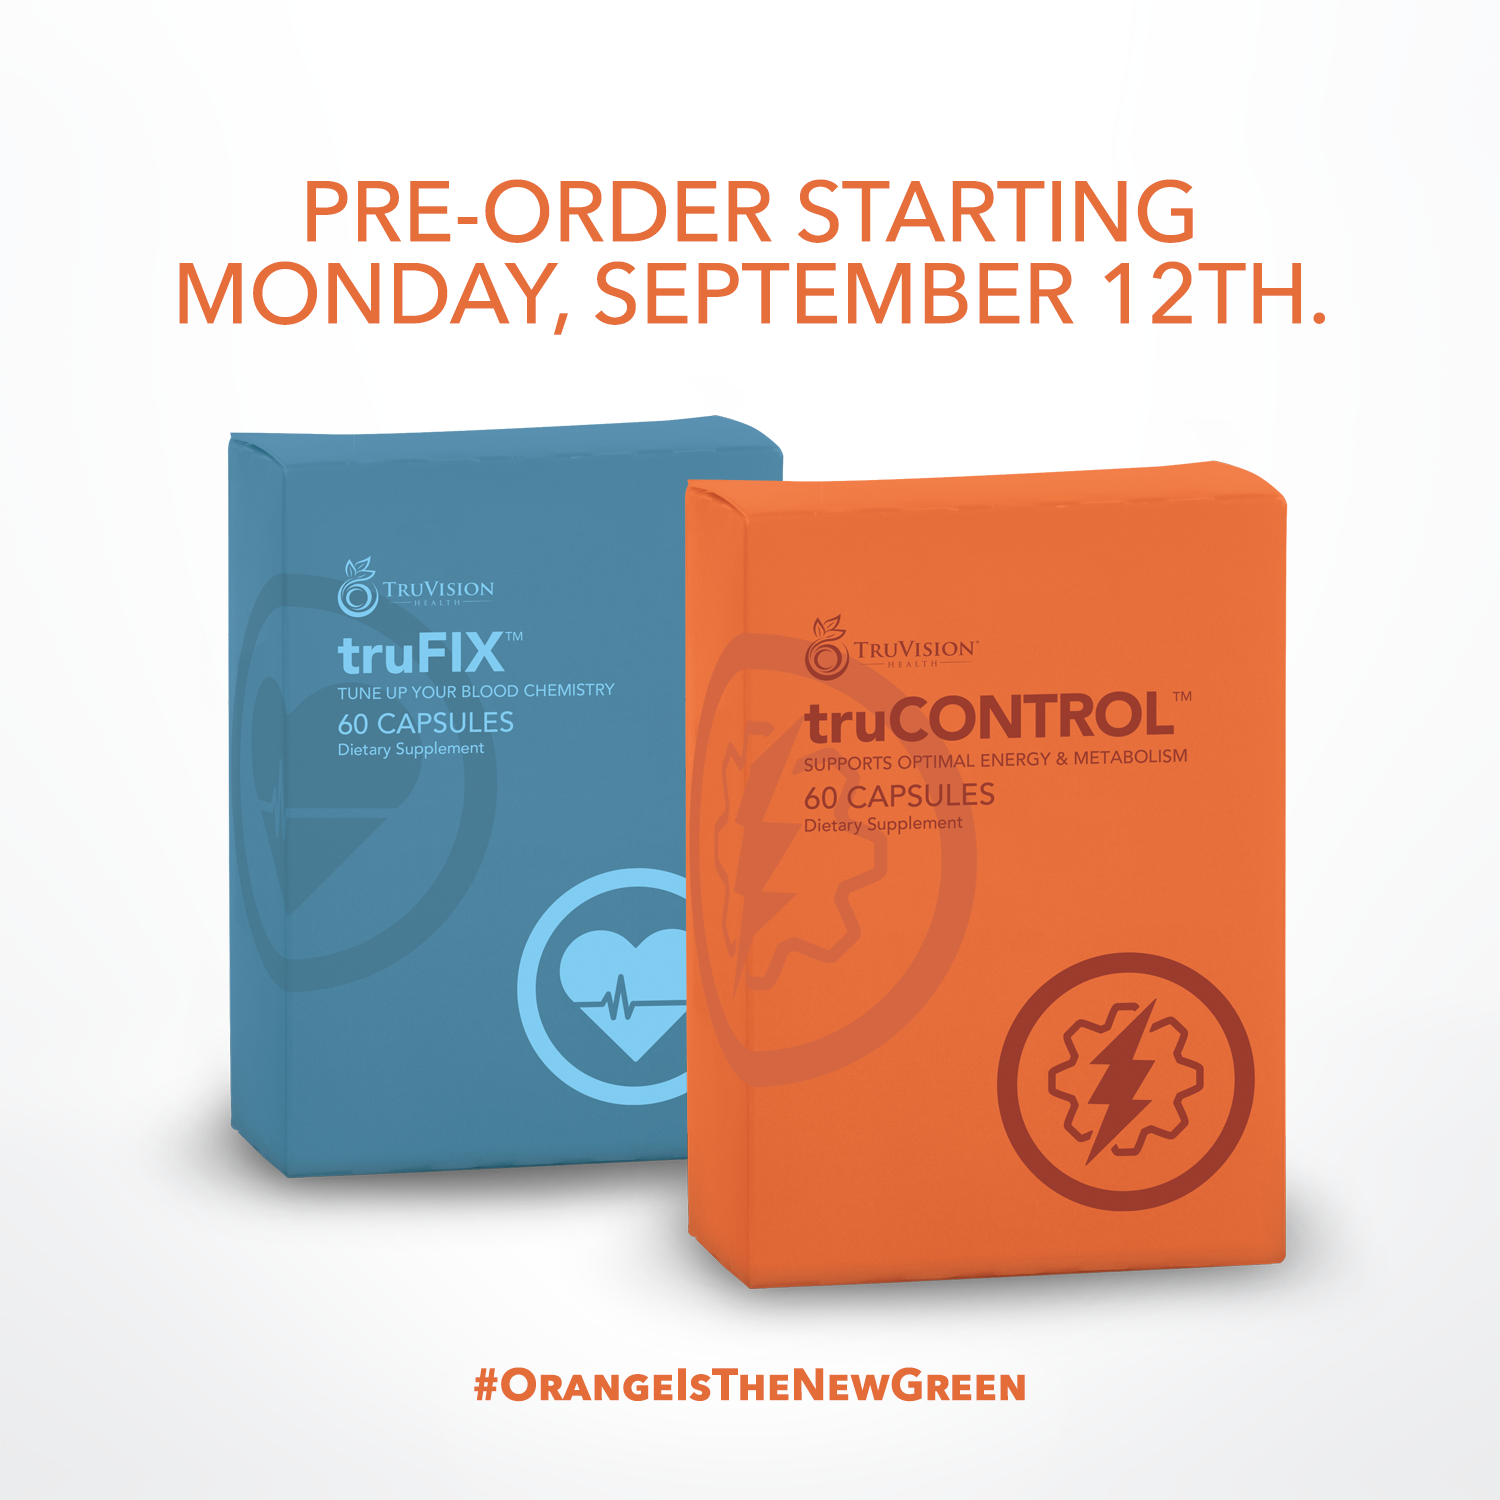 truCONTROL is available for pre-orders in September 2016.